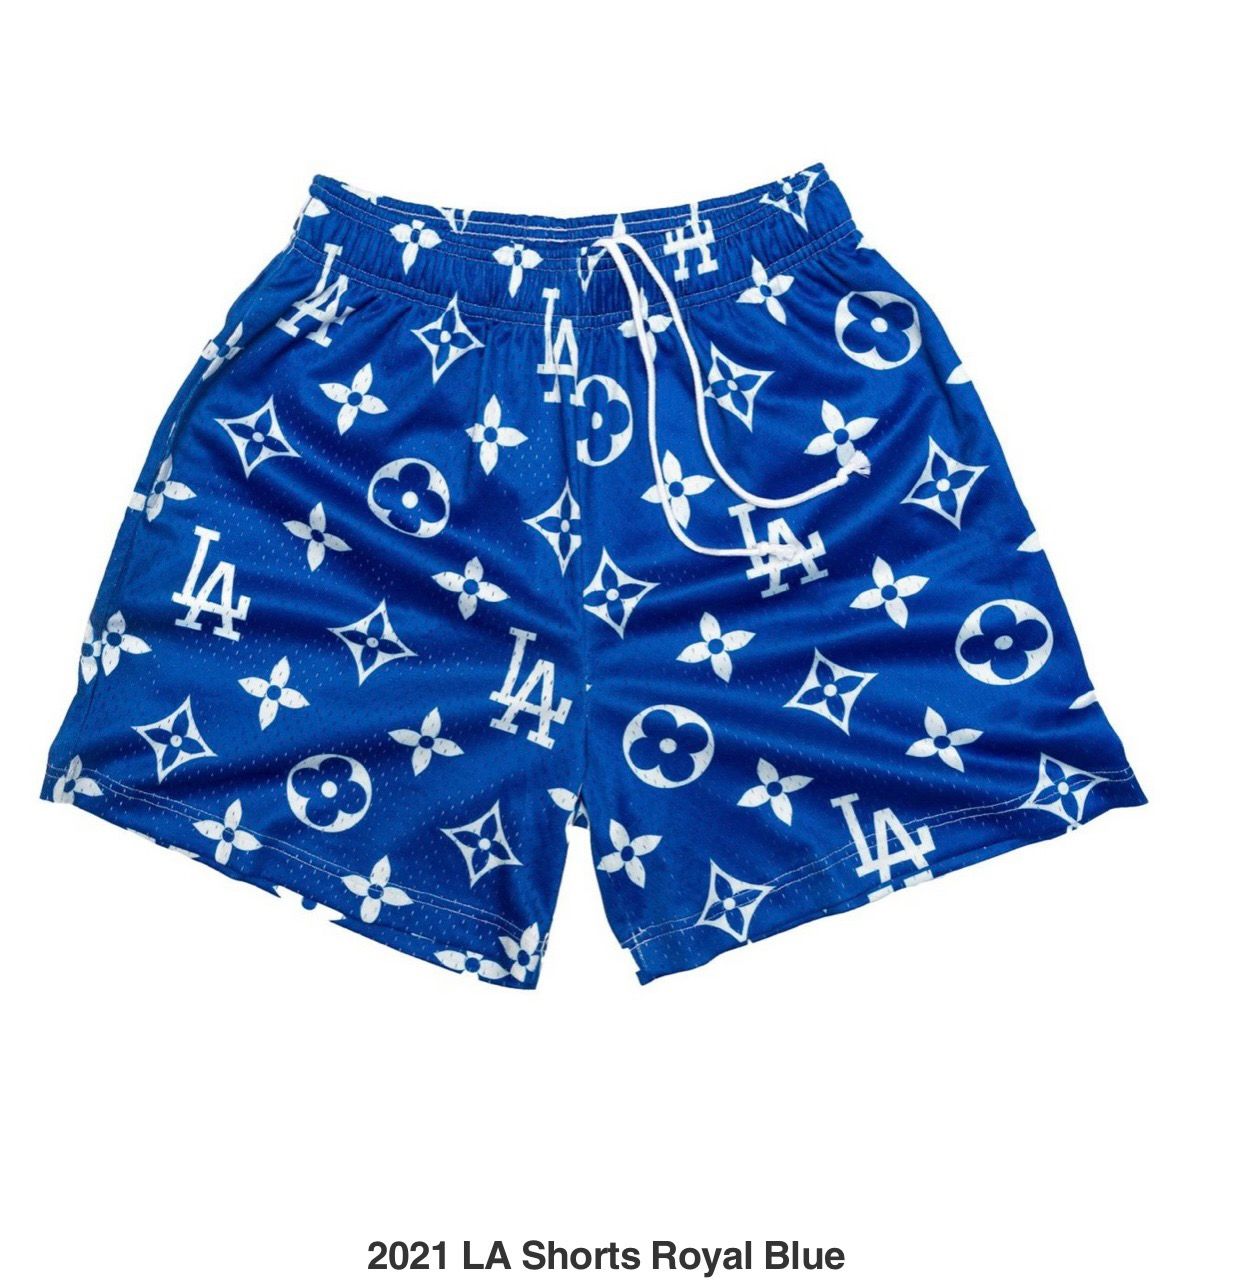 Dodgers Louis Vuitton Shorts for Sale in Lakewood, WA - OfferUp